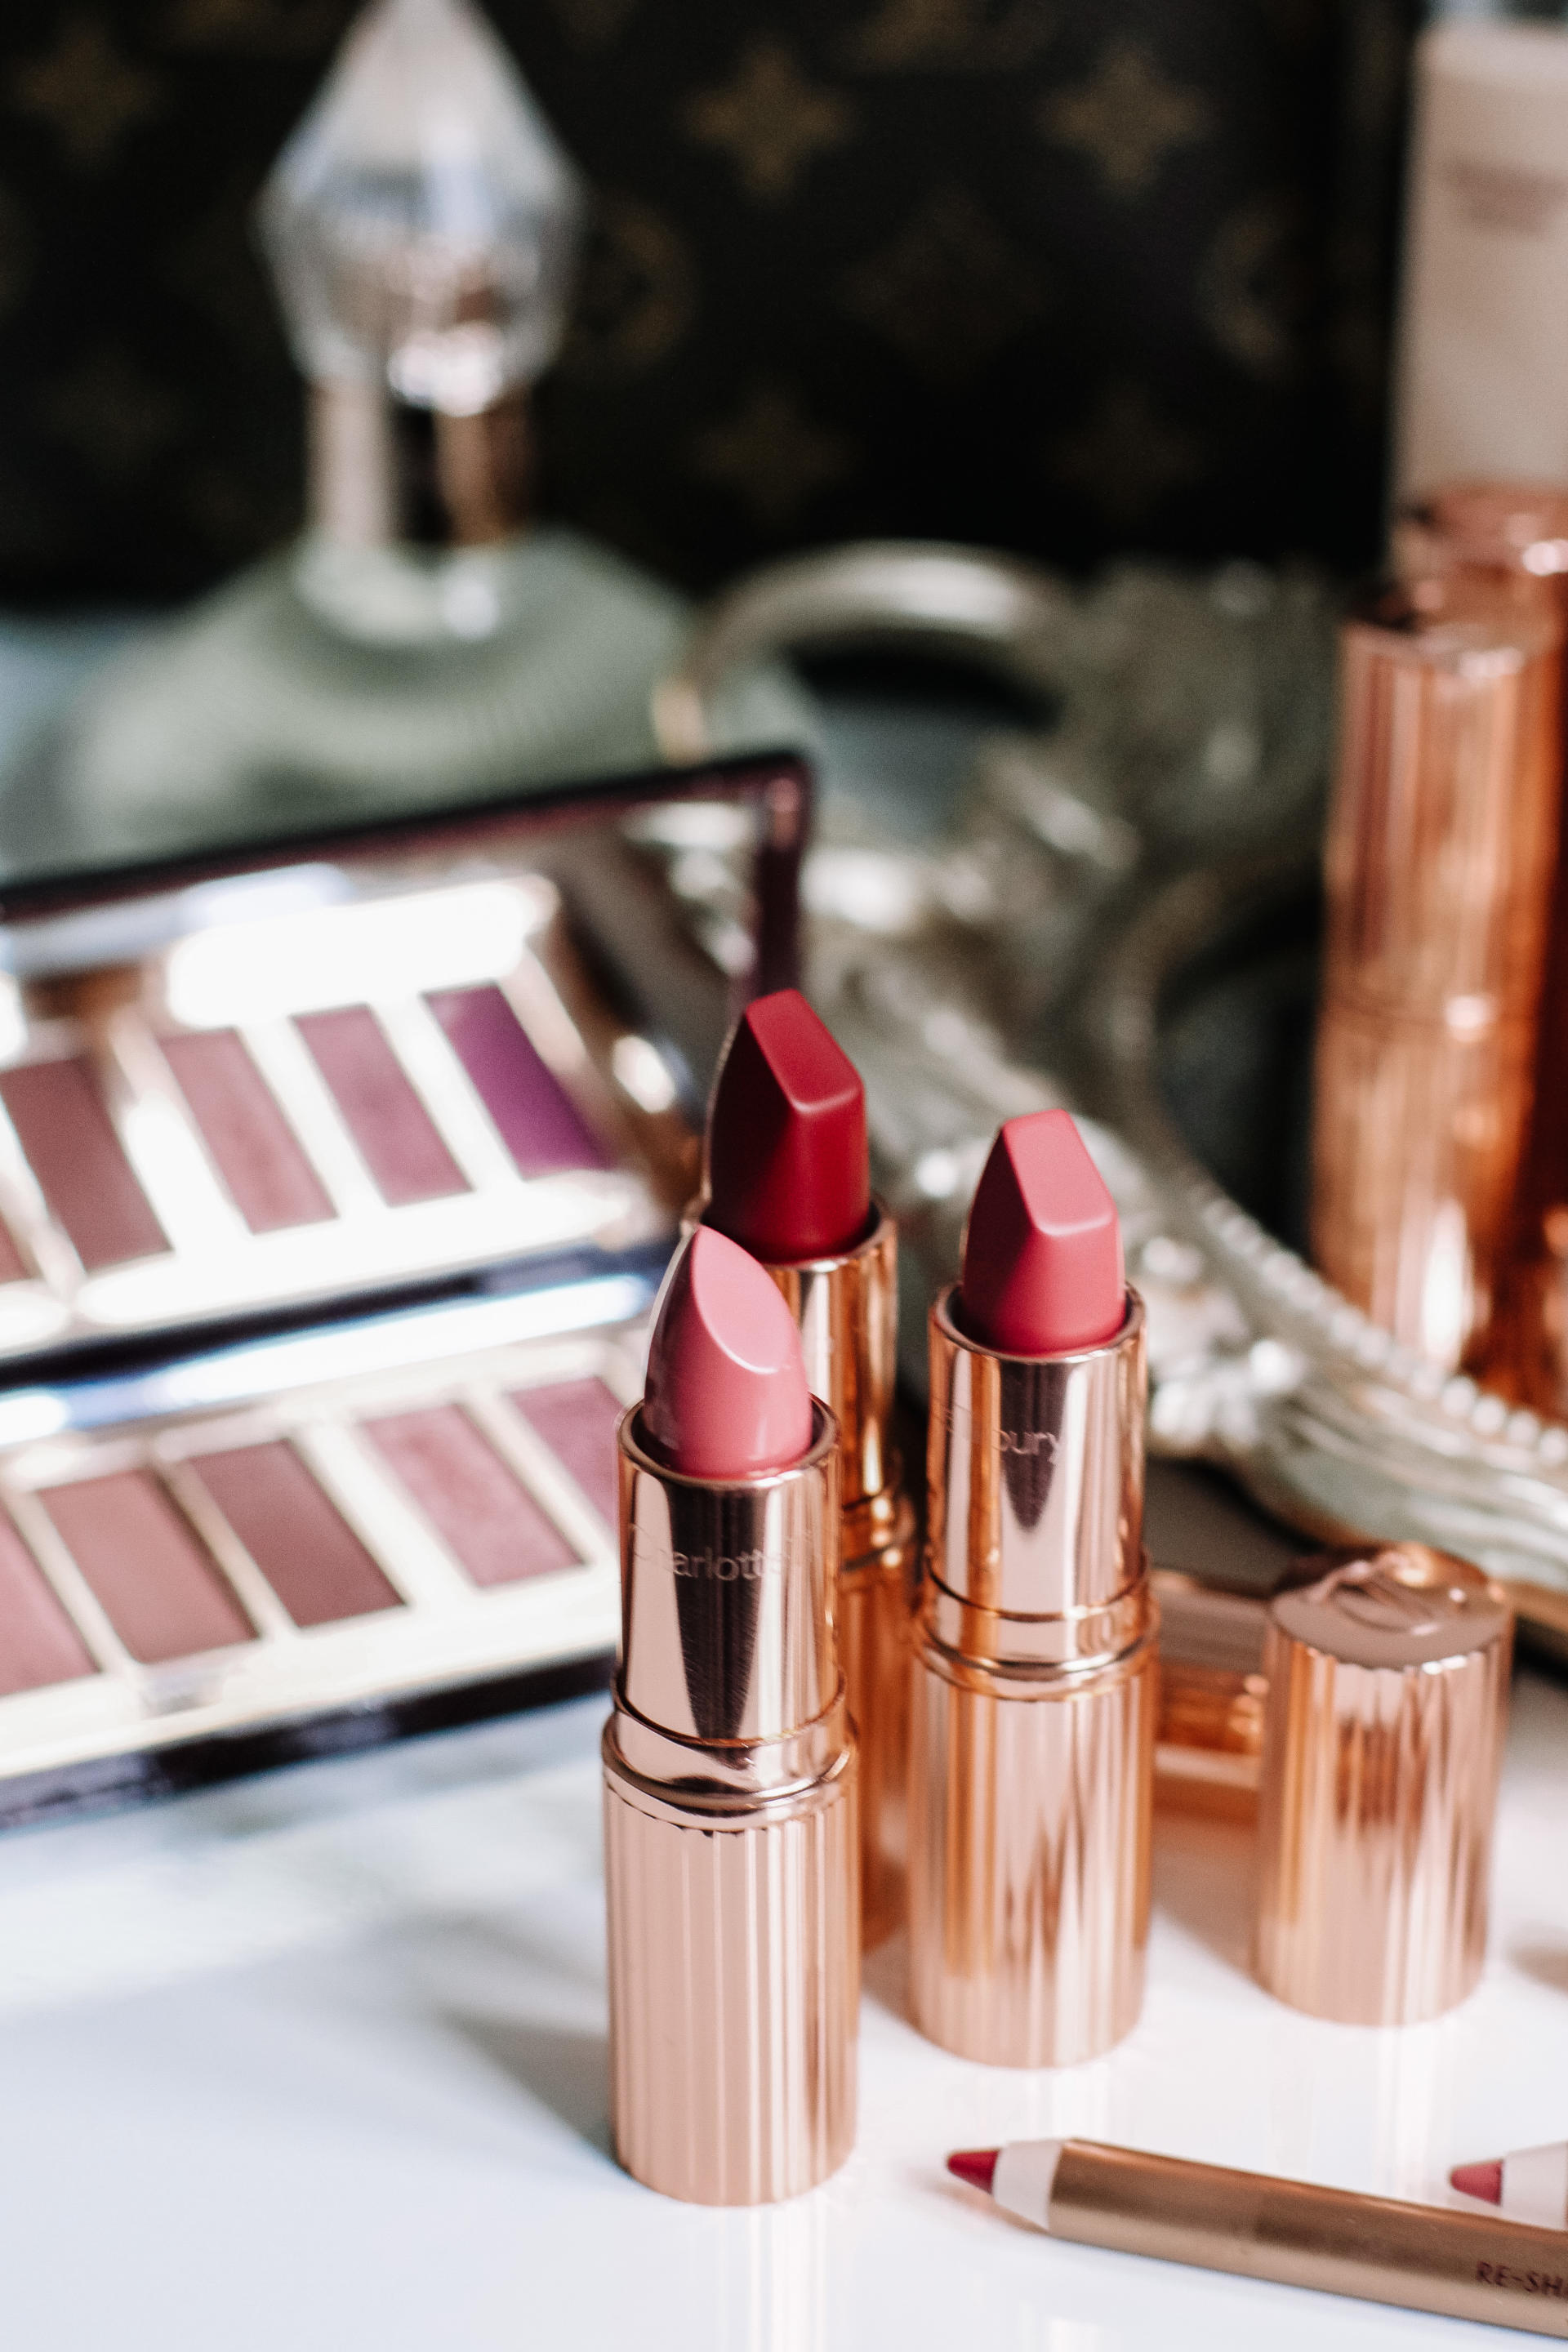 Charlotte Tilbury's Best Black Friday Beauty Deals | Style Domination by Dominique Baker